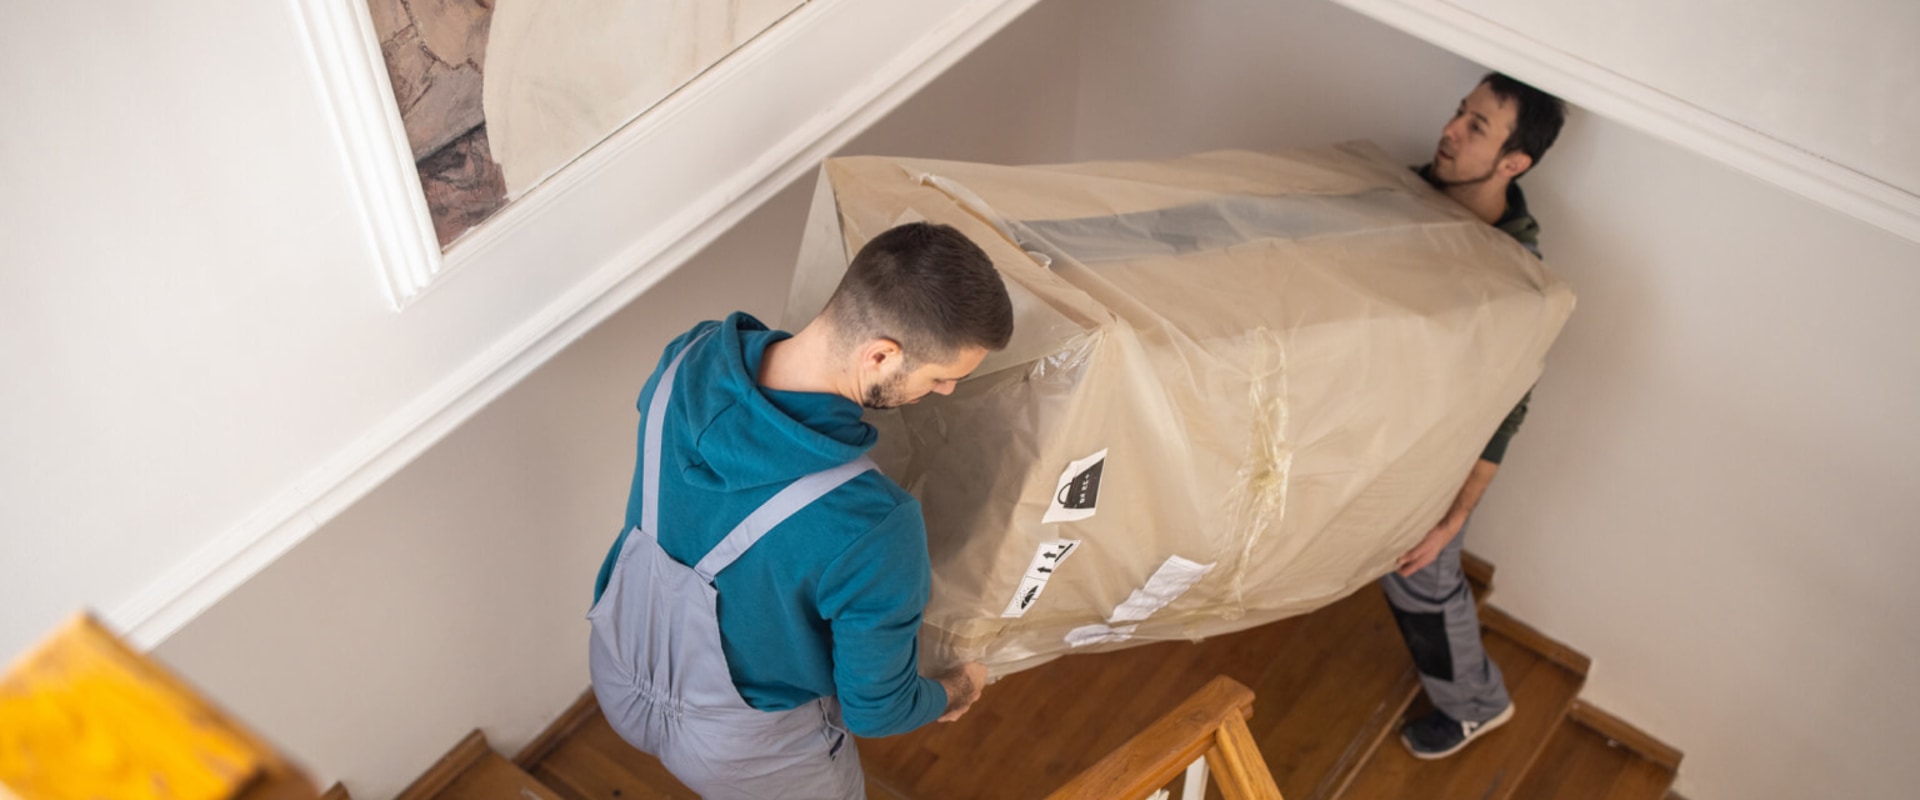 How Much Should You Tip Professional Movers?